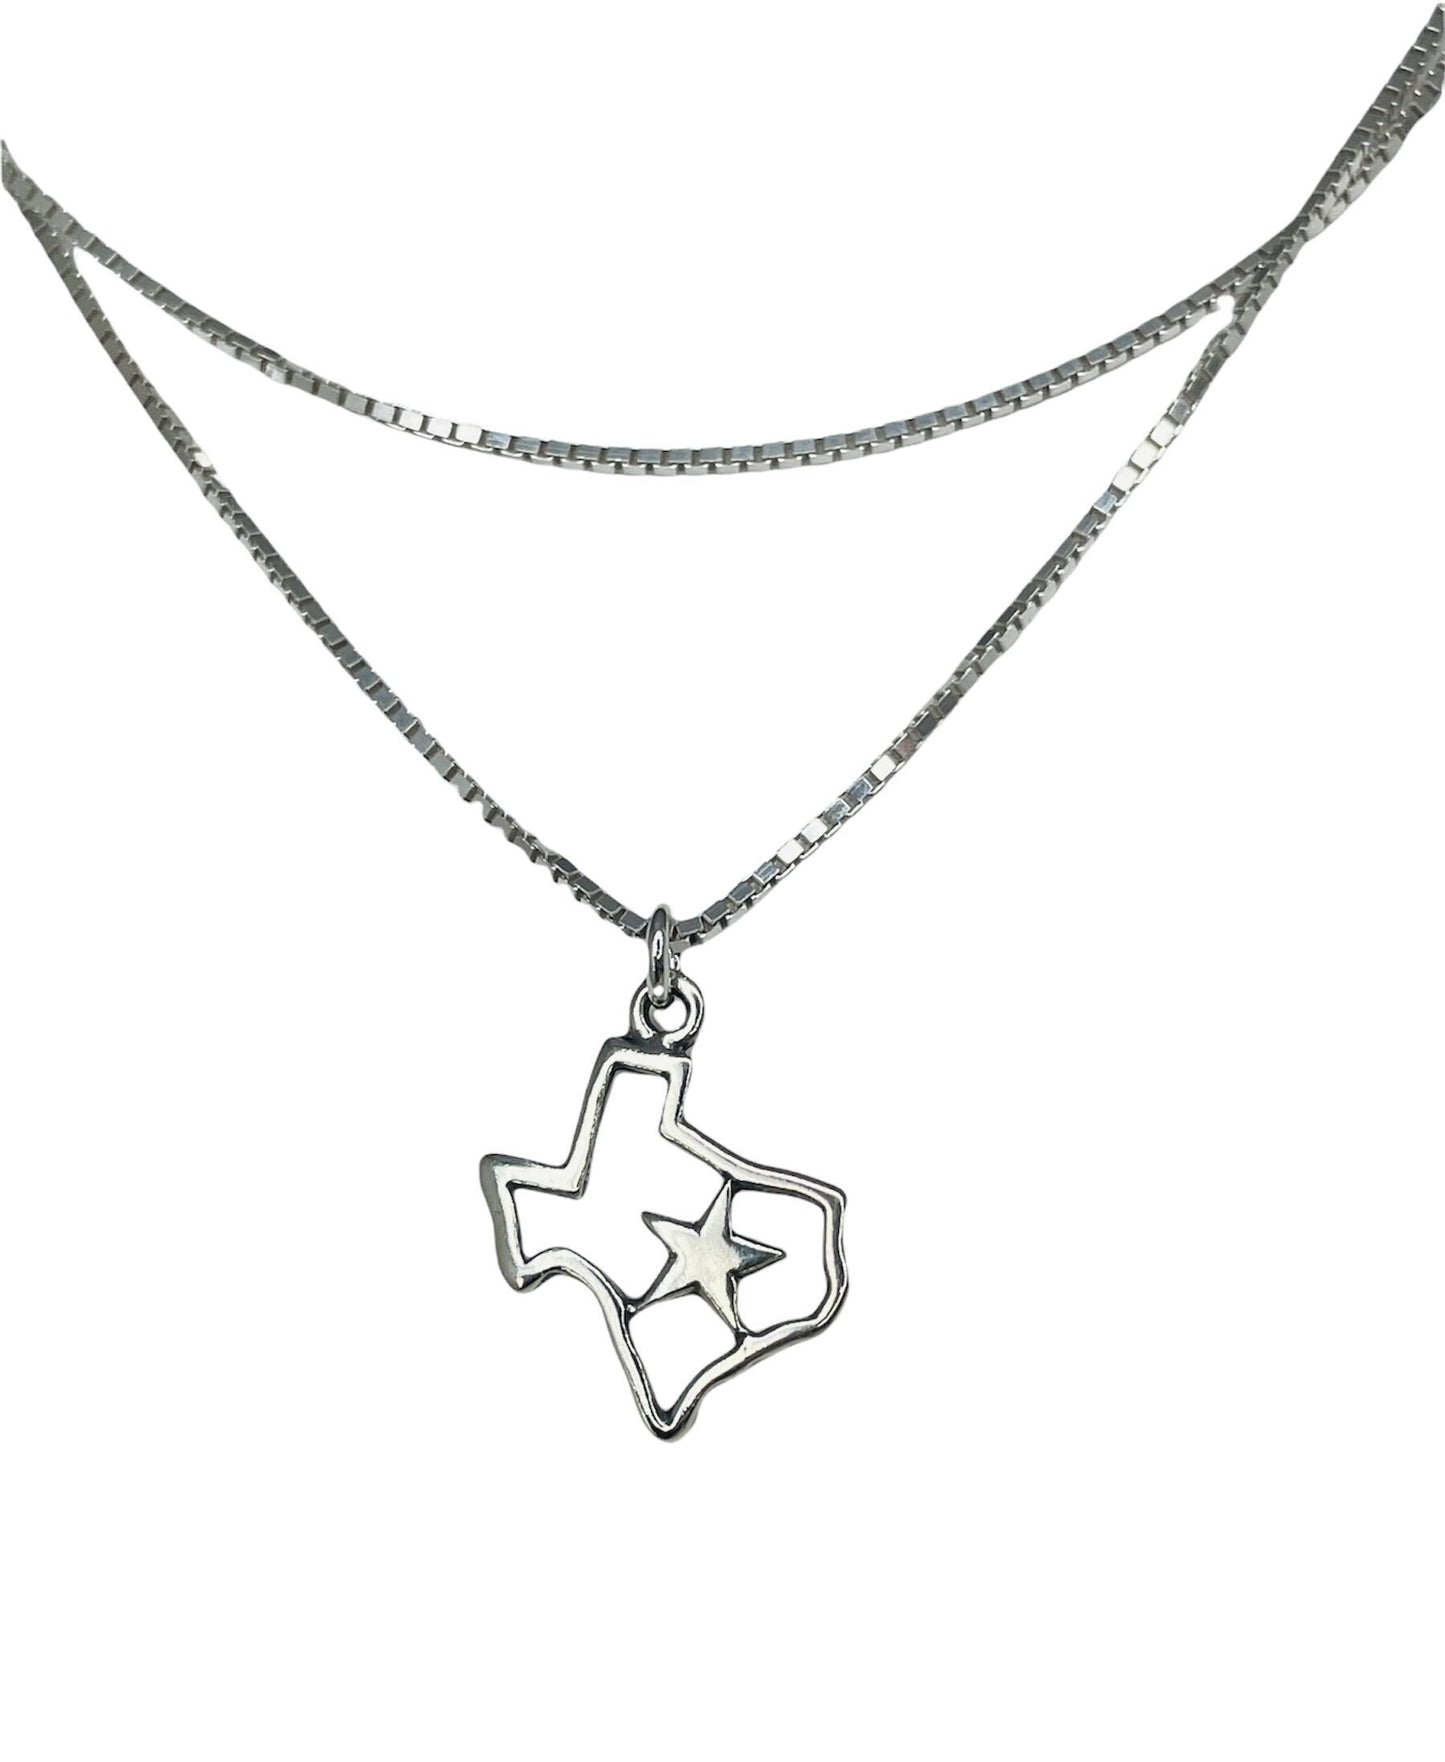 Sterling Silver Texas Necklace, Lone Star Necklace, Texas Lone Star Necklace, Map Necklace, Texas Necklace, Texas Map Necklace, Texas Star